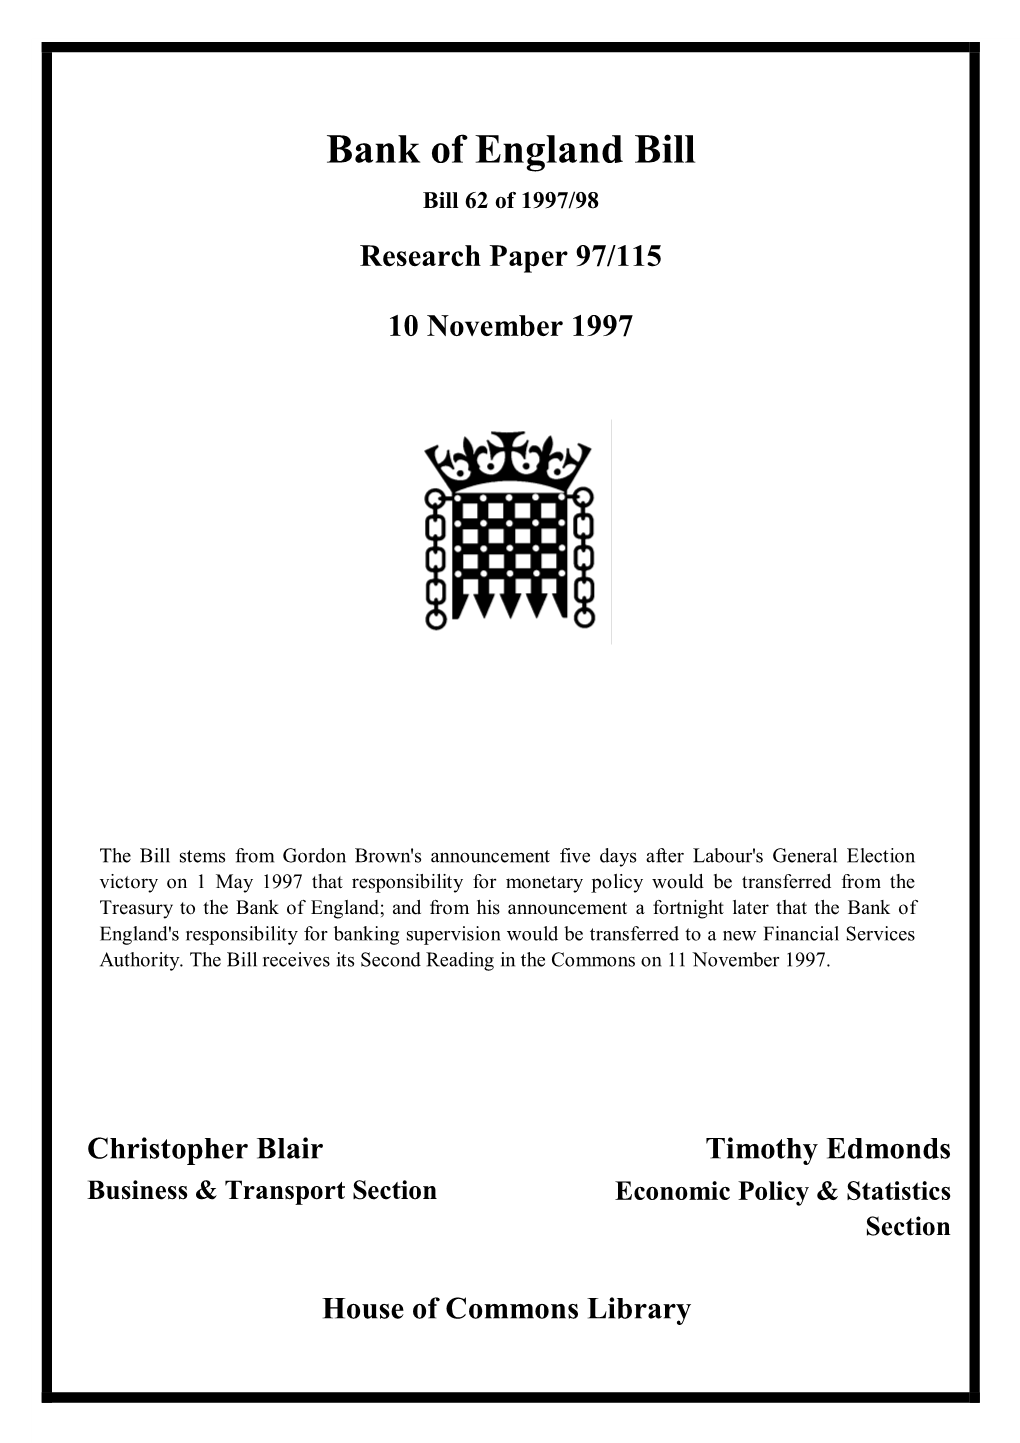 Bank of England Bill Bill 62 of 1997/98 Research Paper 97/115